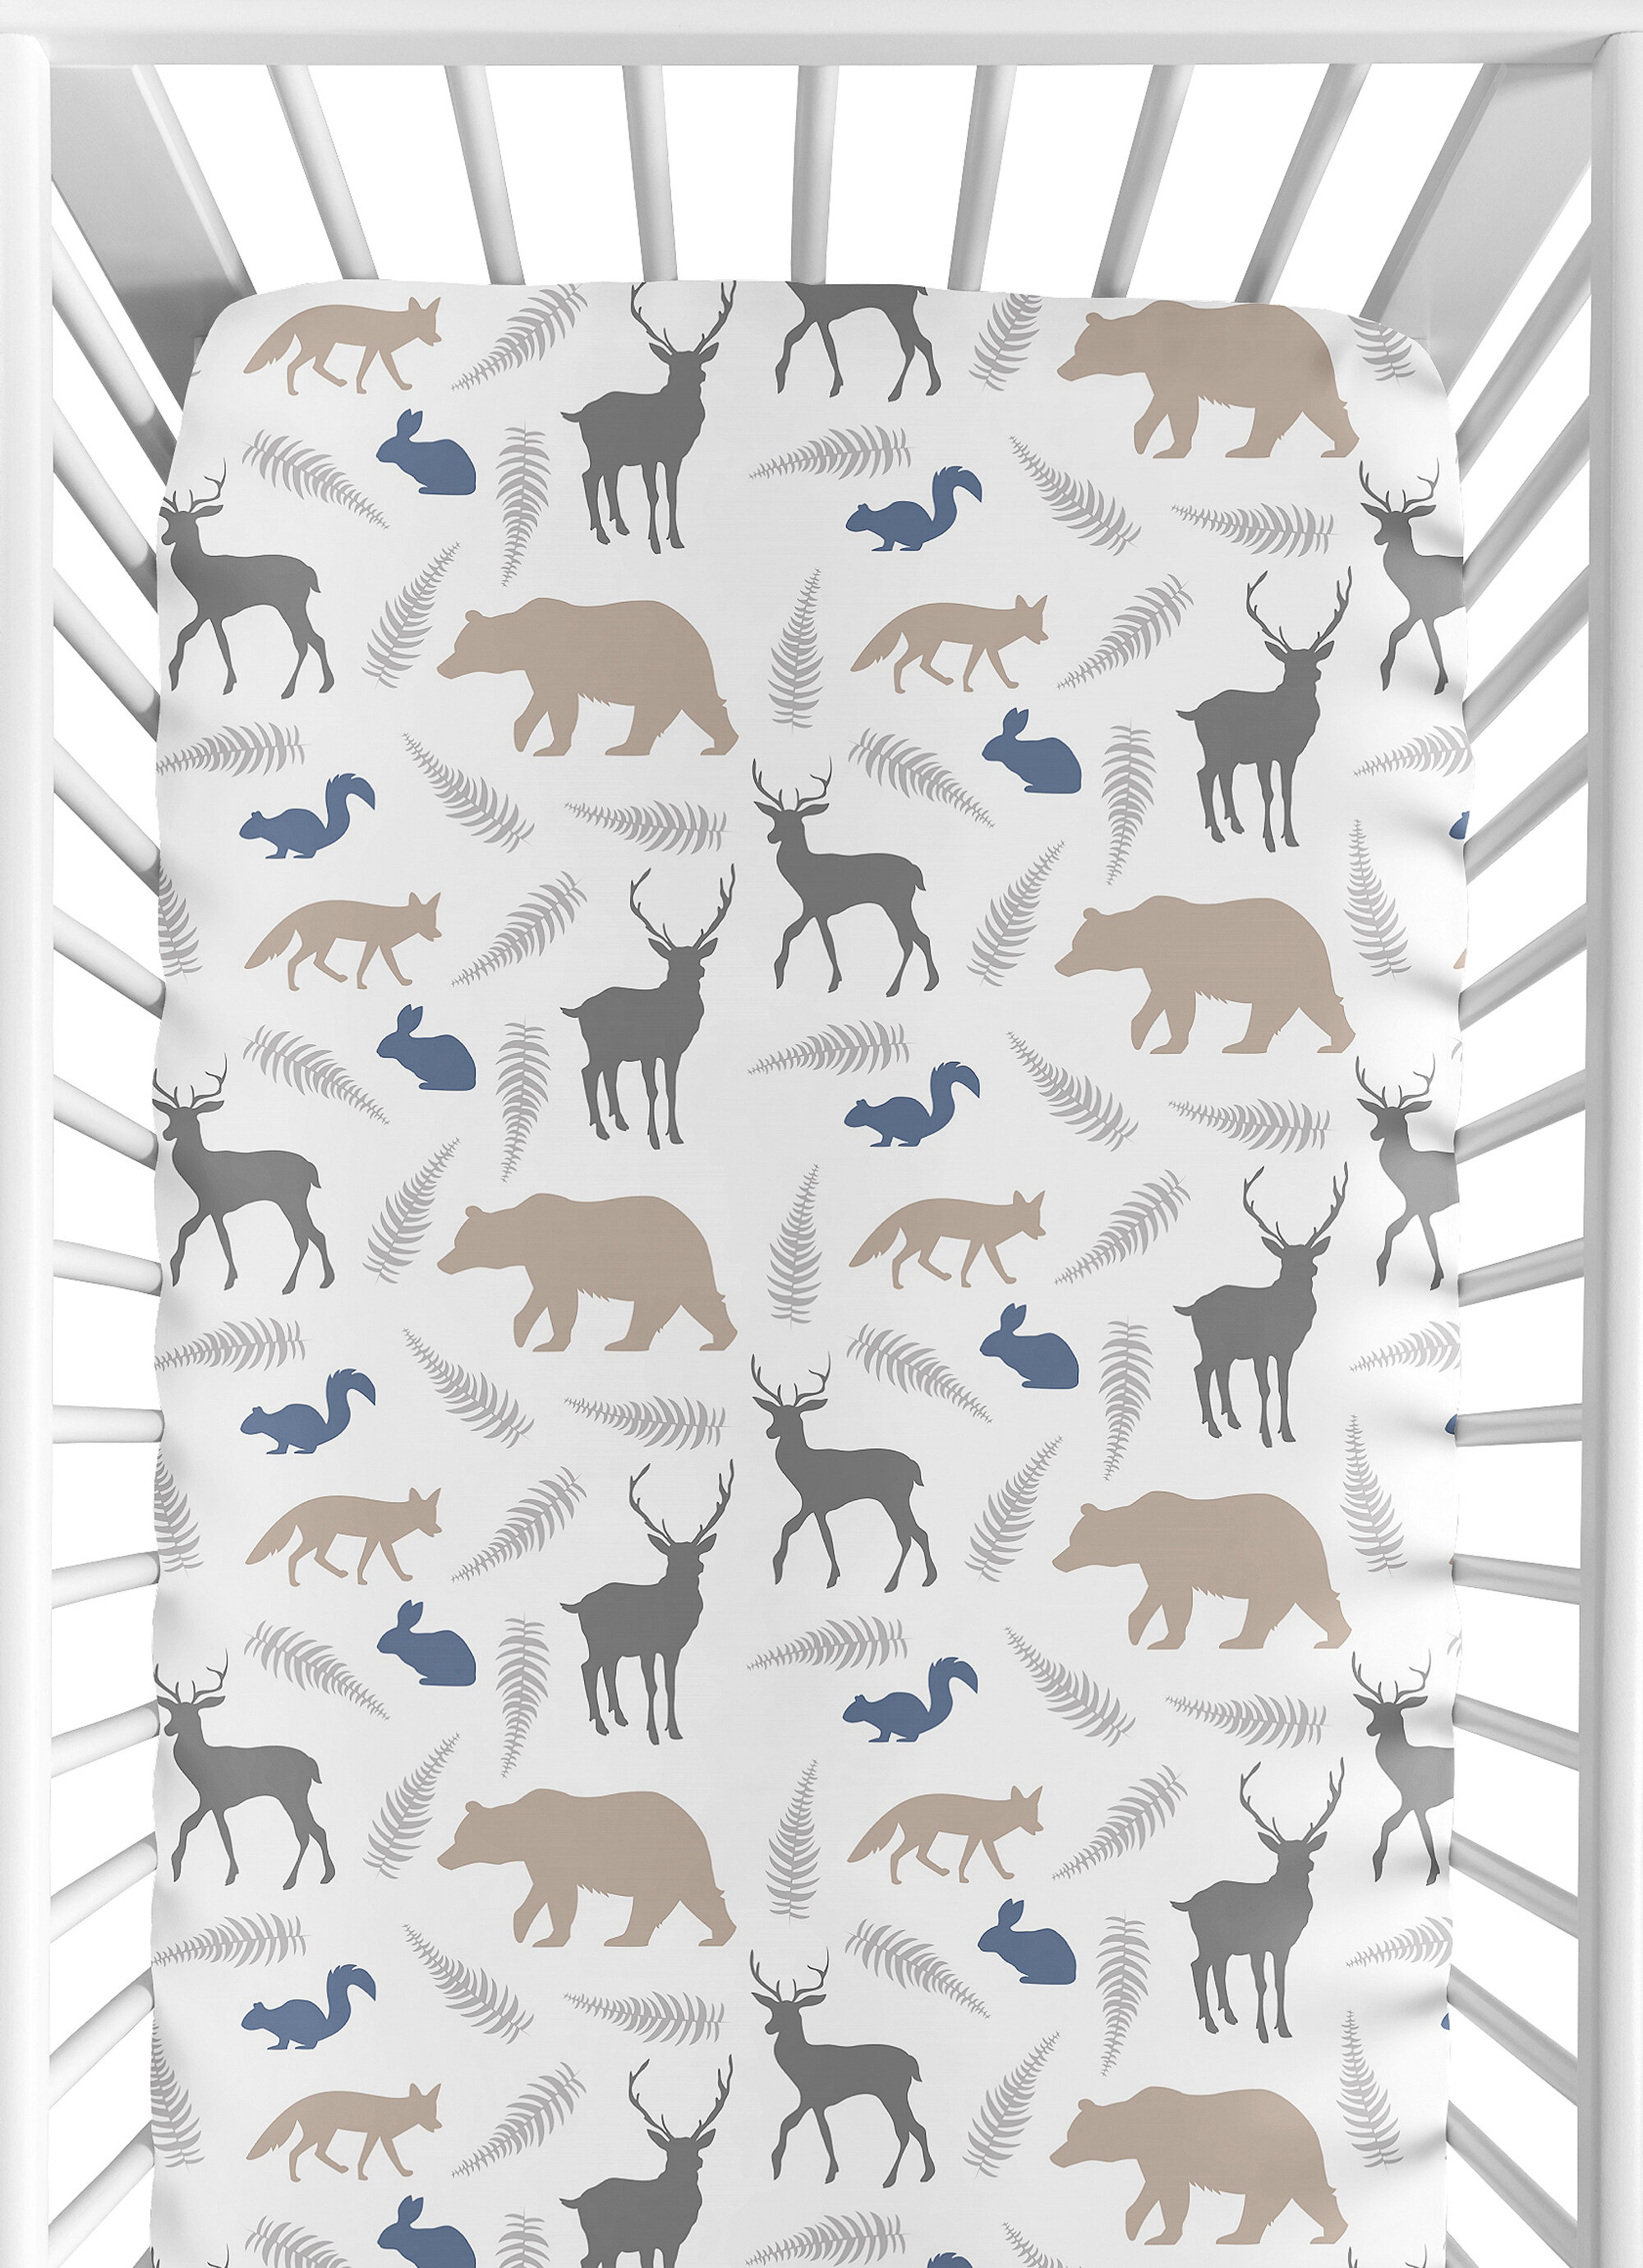 woodland fitted crib sheet